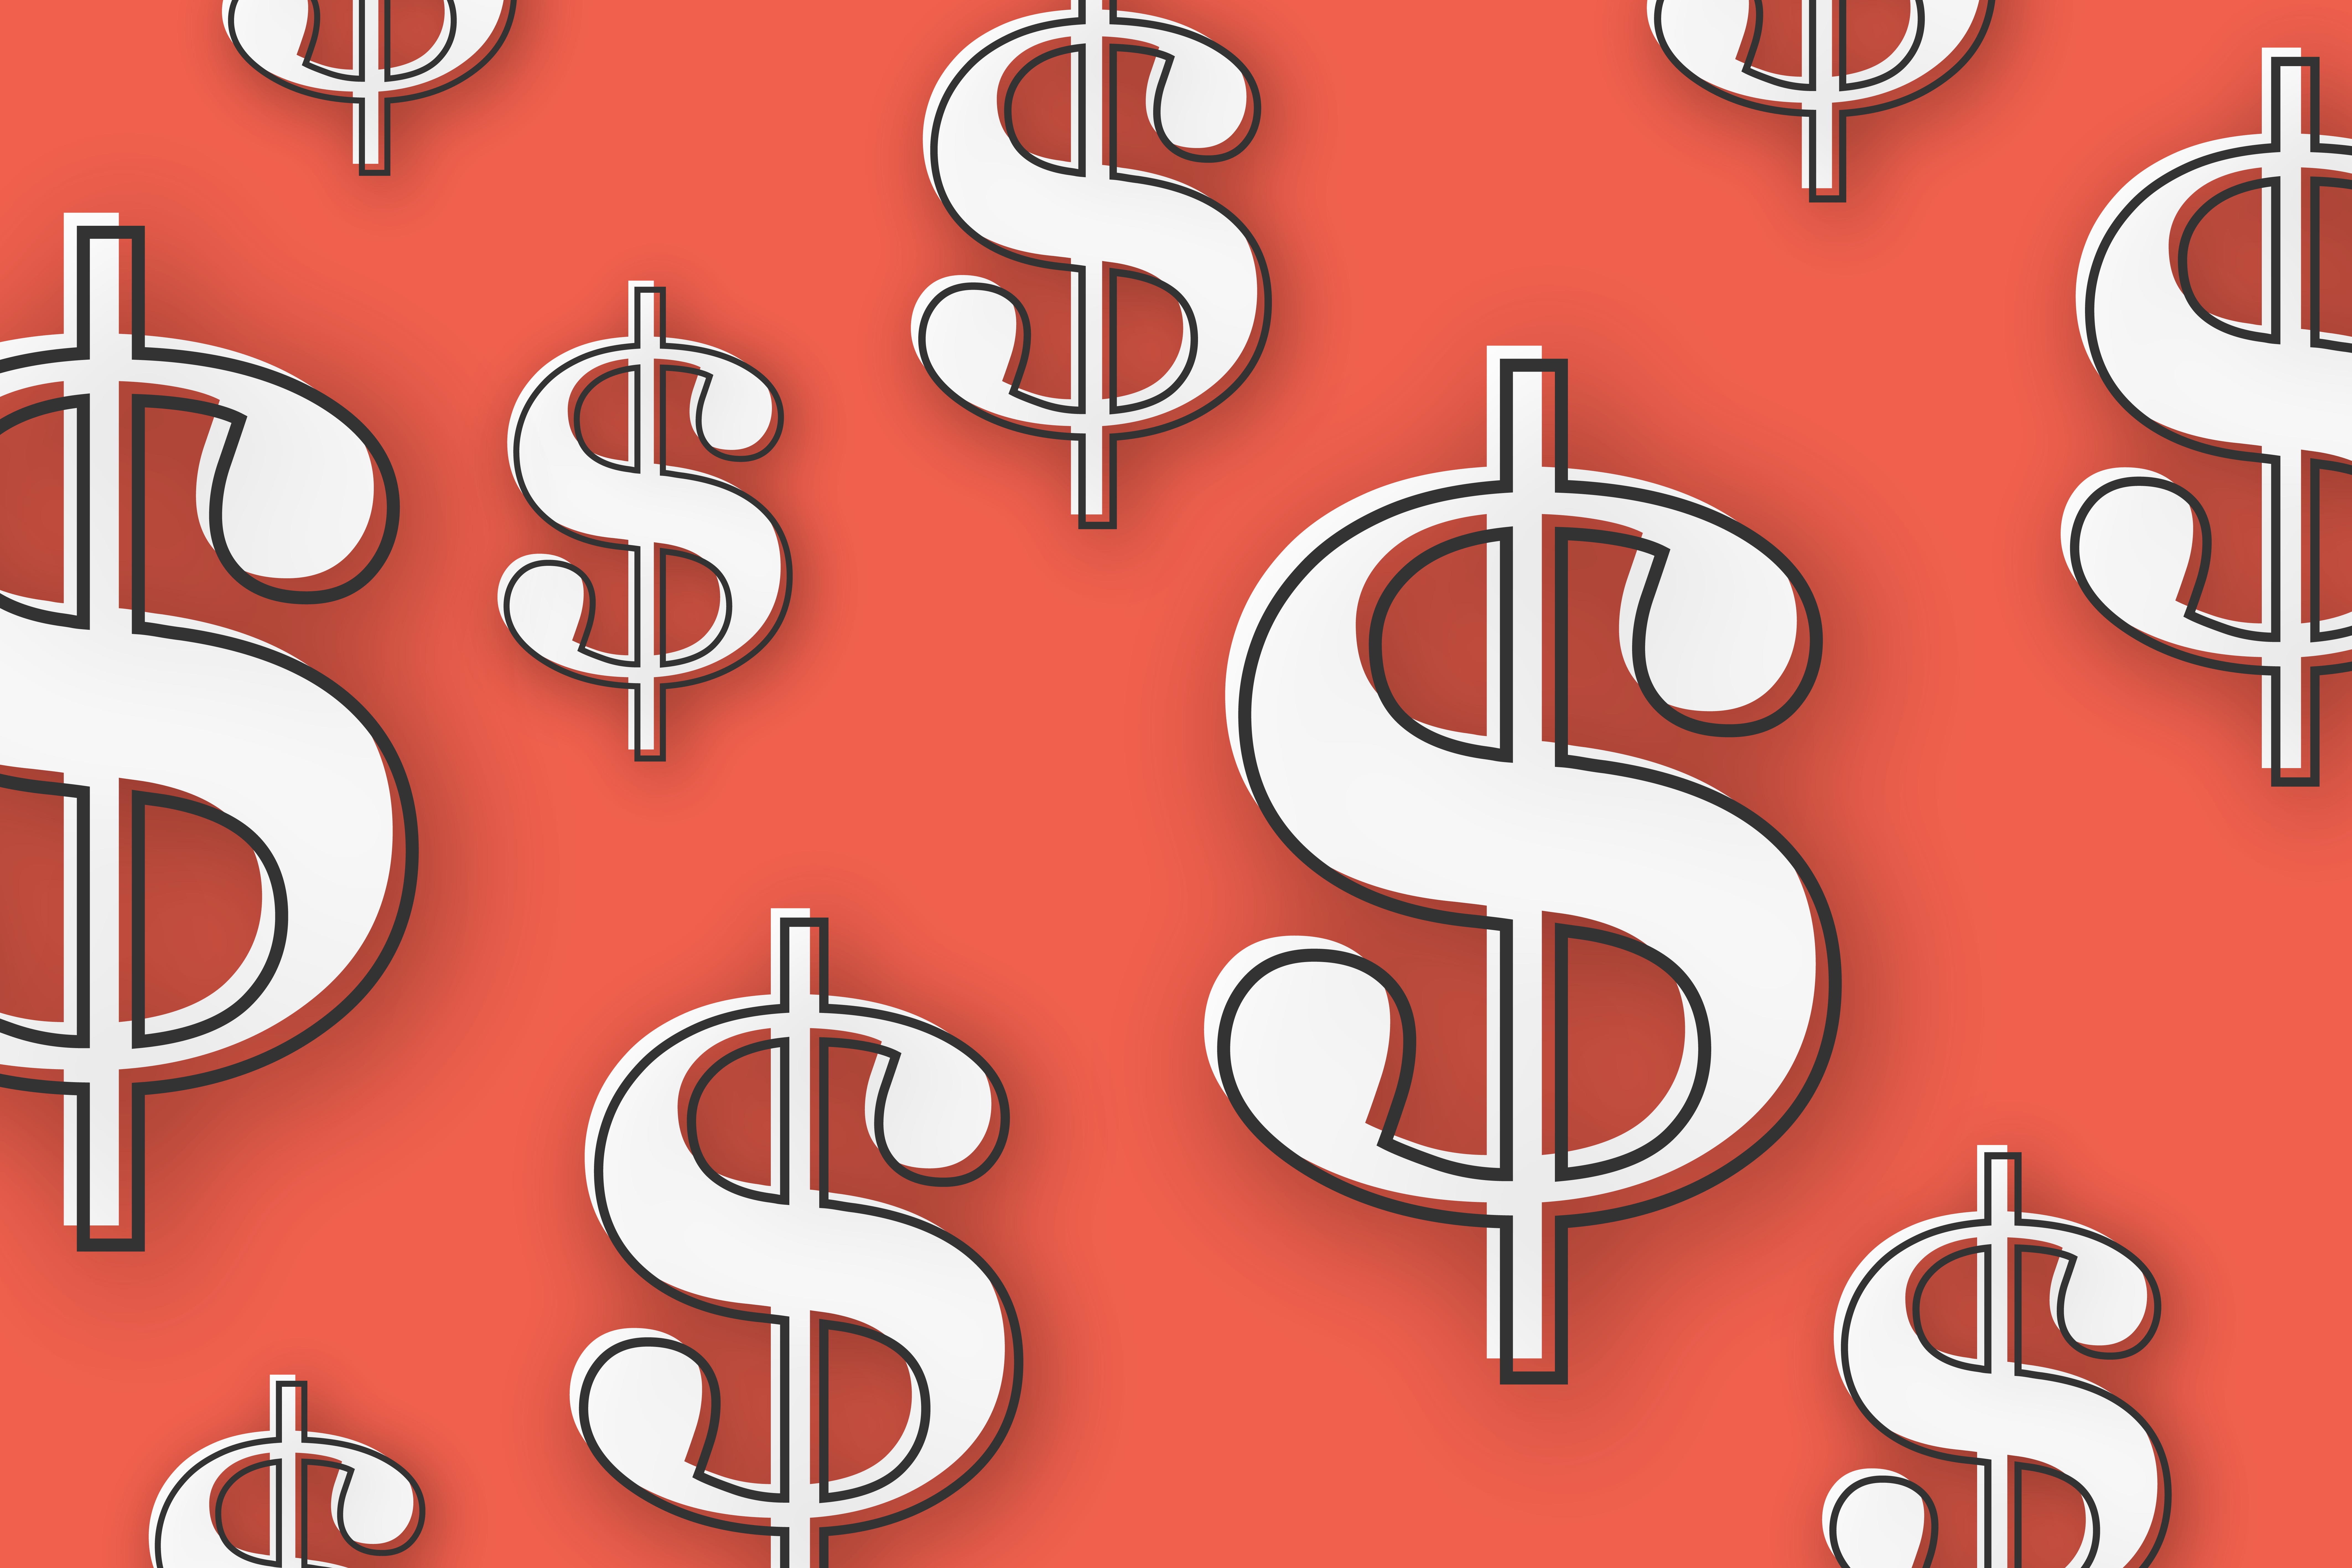 Multiple dollar sign symbols on a red background.